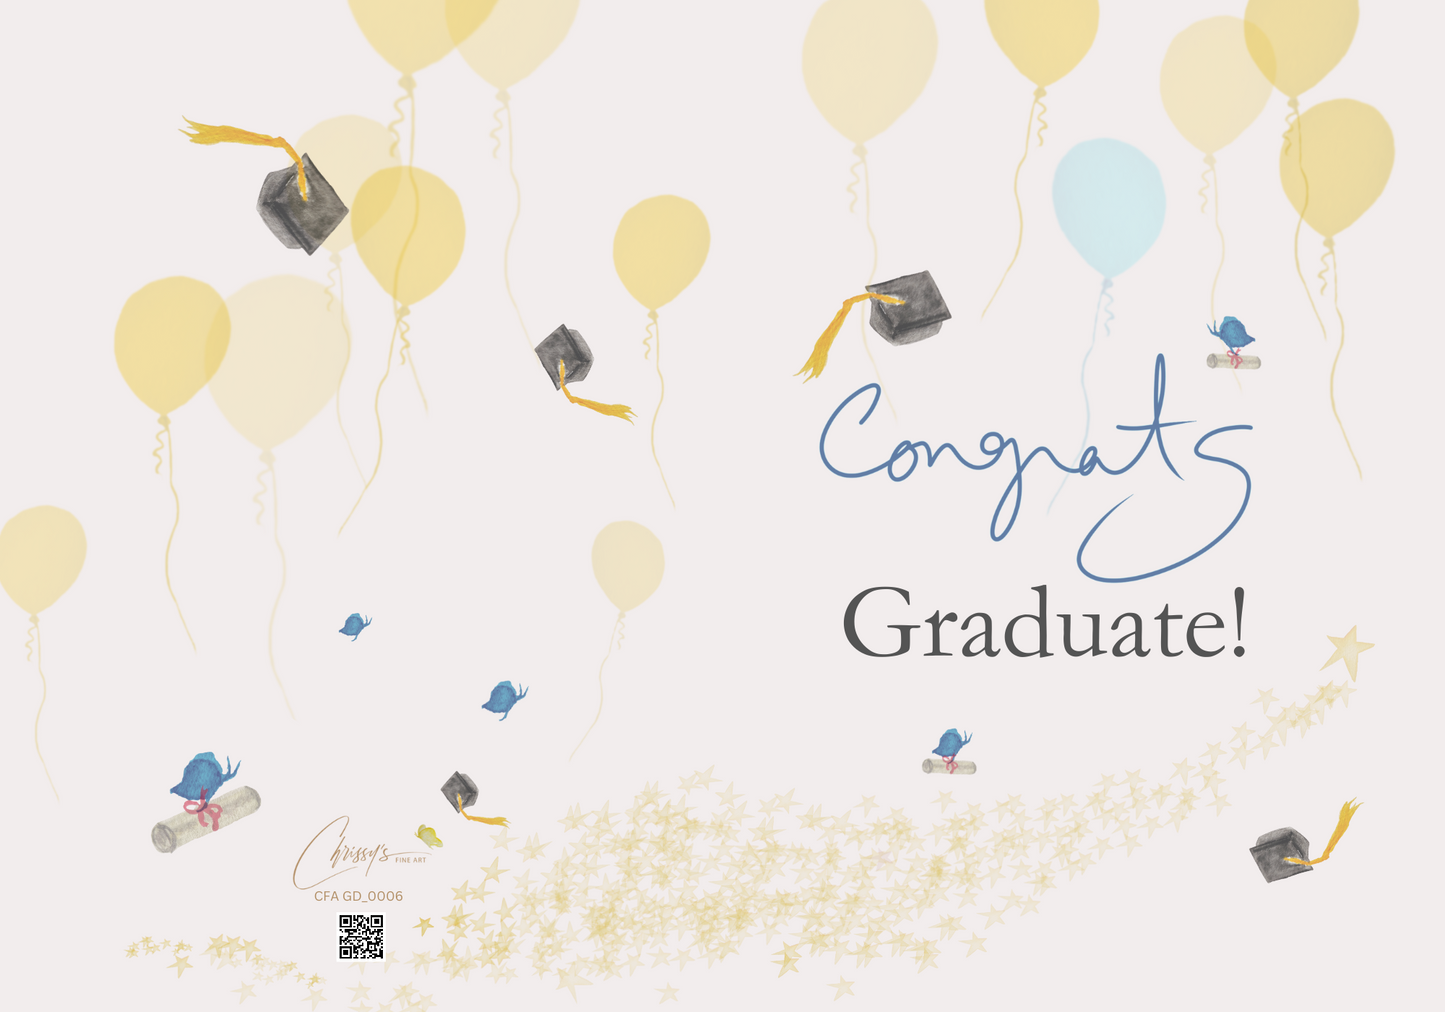 Congrats! Keep Achieving Greatness! Graduation Greeting Card